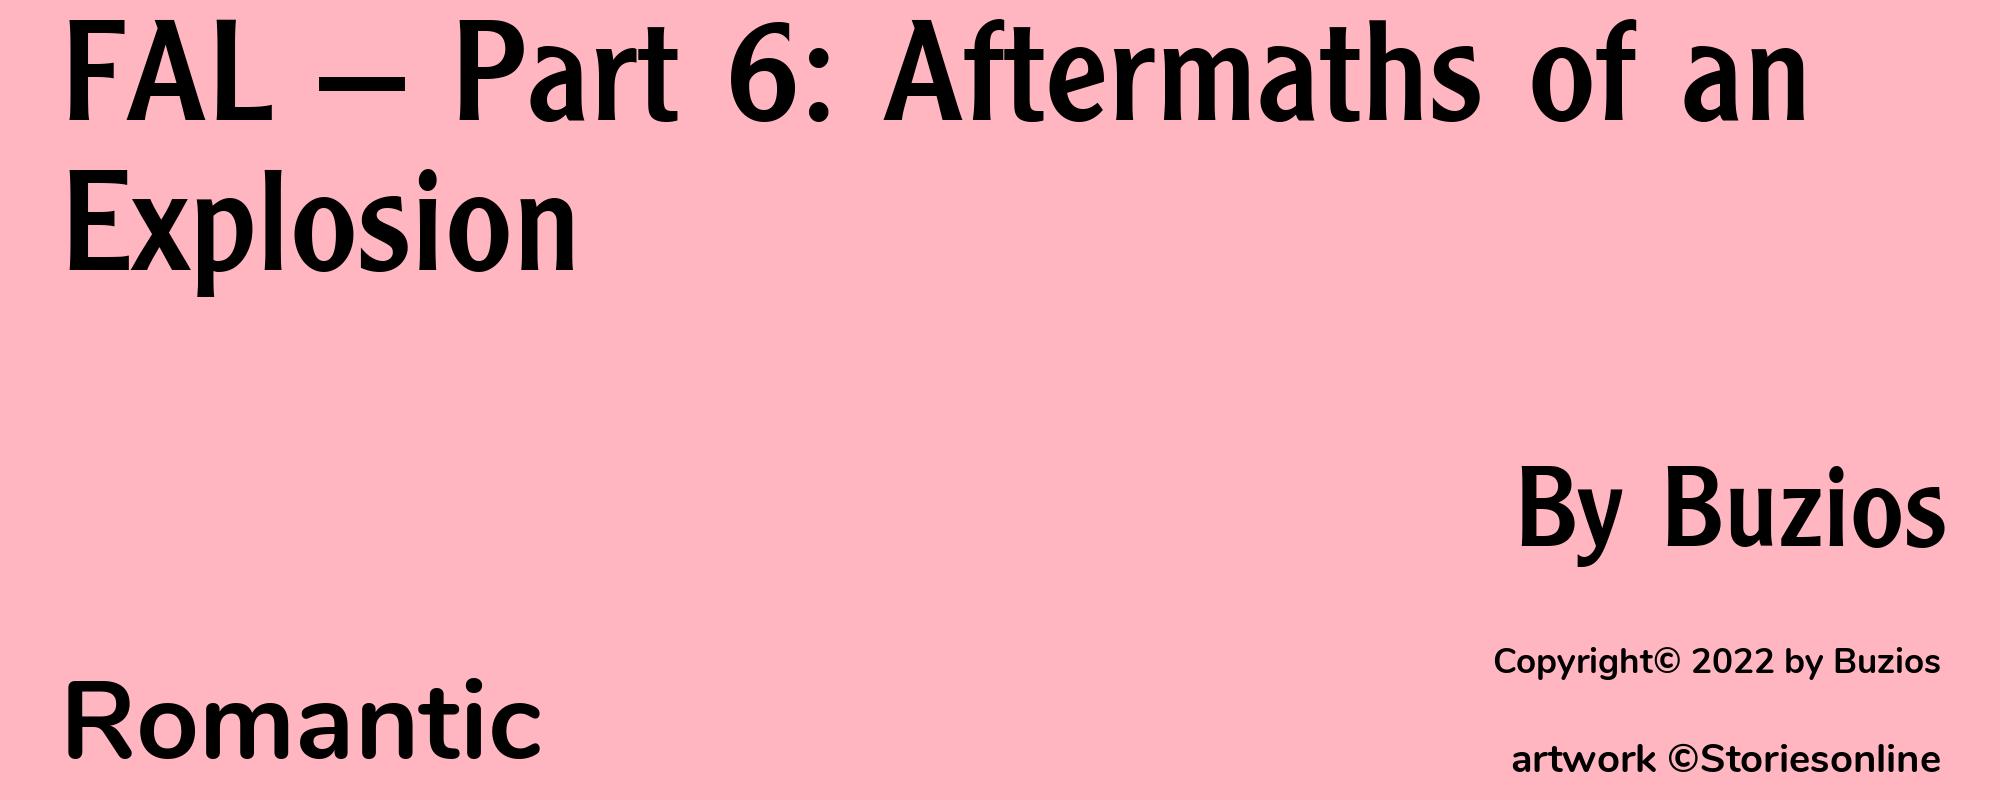 FAL — Part 6: Aftermaths of an Explosion - Cover